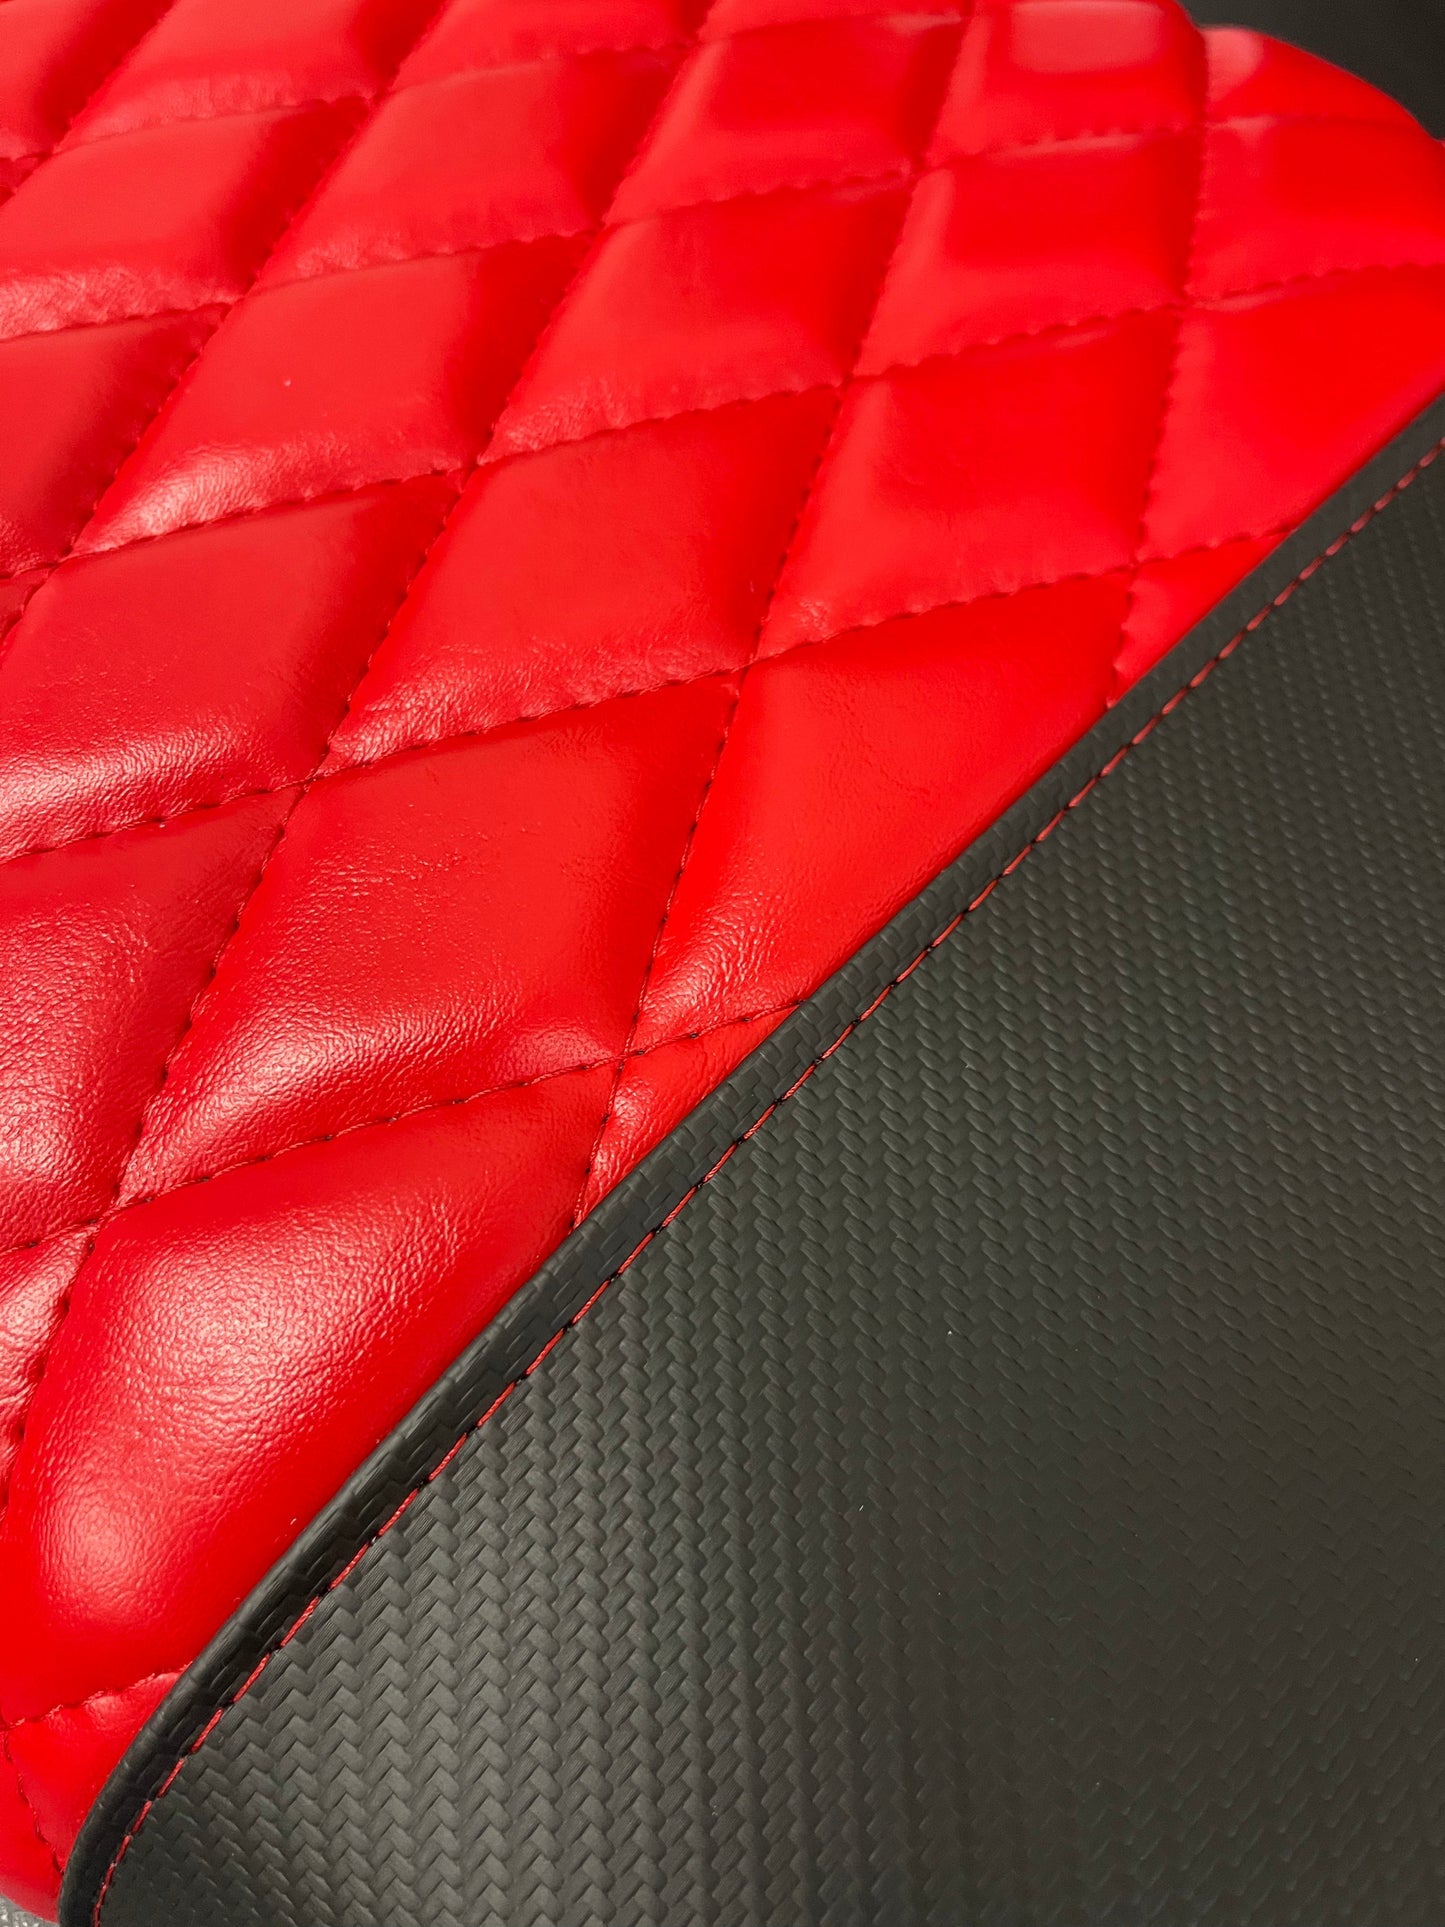 Black Carbon Fiber / Red with Red Diamond stitching